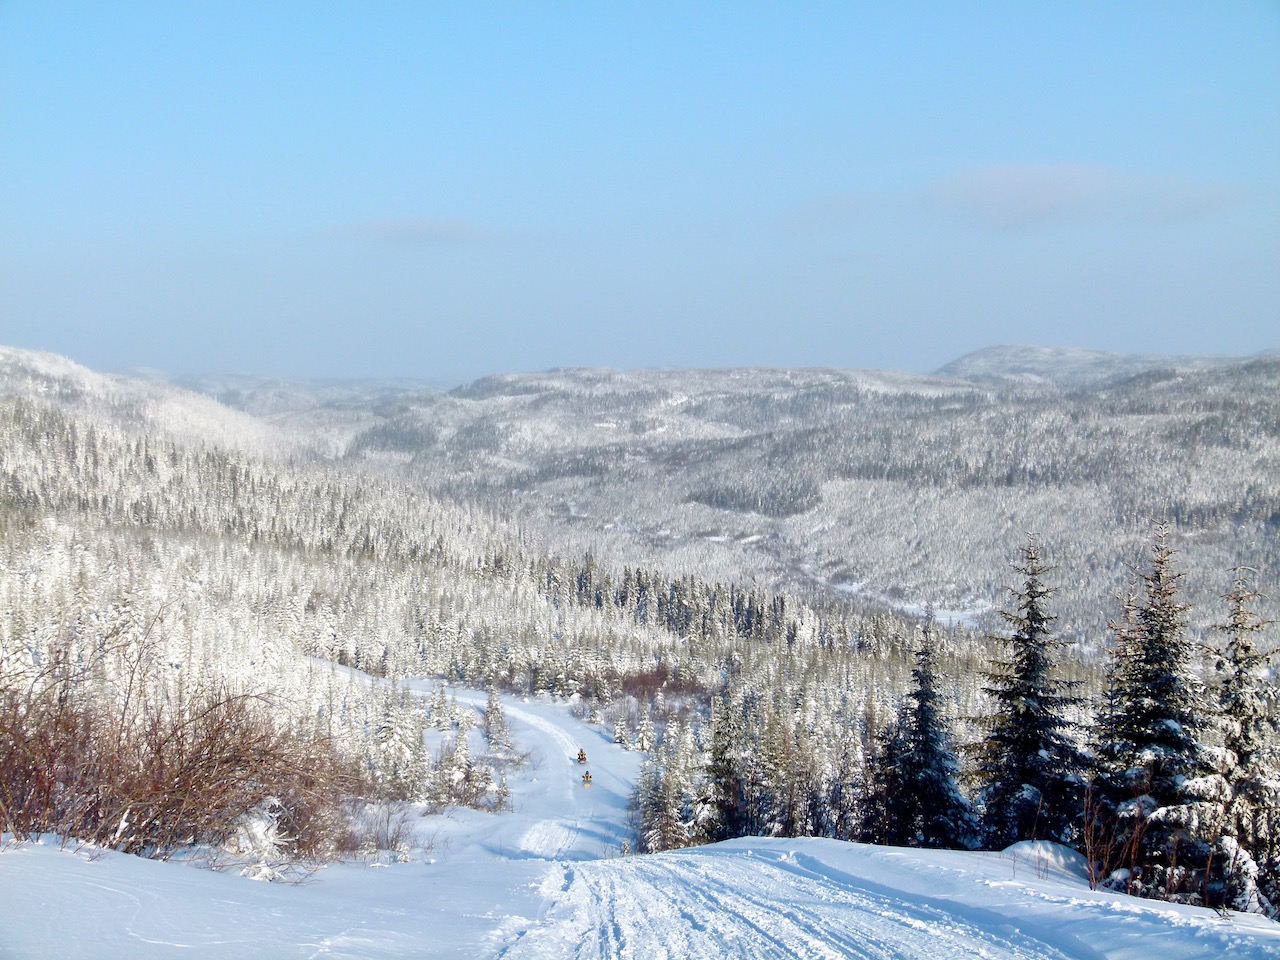 Monts-Valin welcomes snowmobilers with awesome sceney to the Saguenay-Lac-Saint-Jean Region of Quebec.